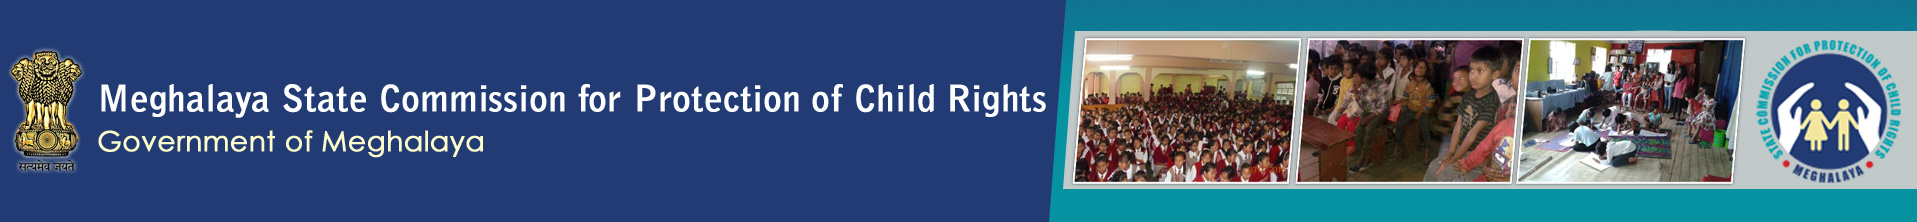  Meghalaya State Commission for Protection of Child Rights Banner